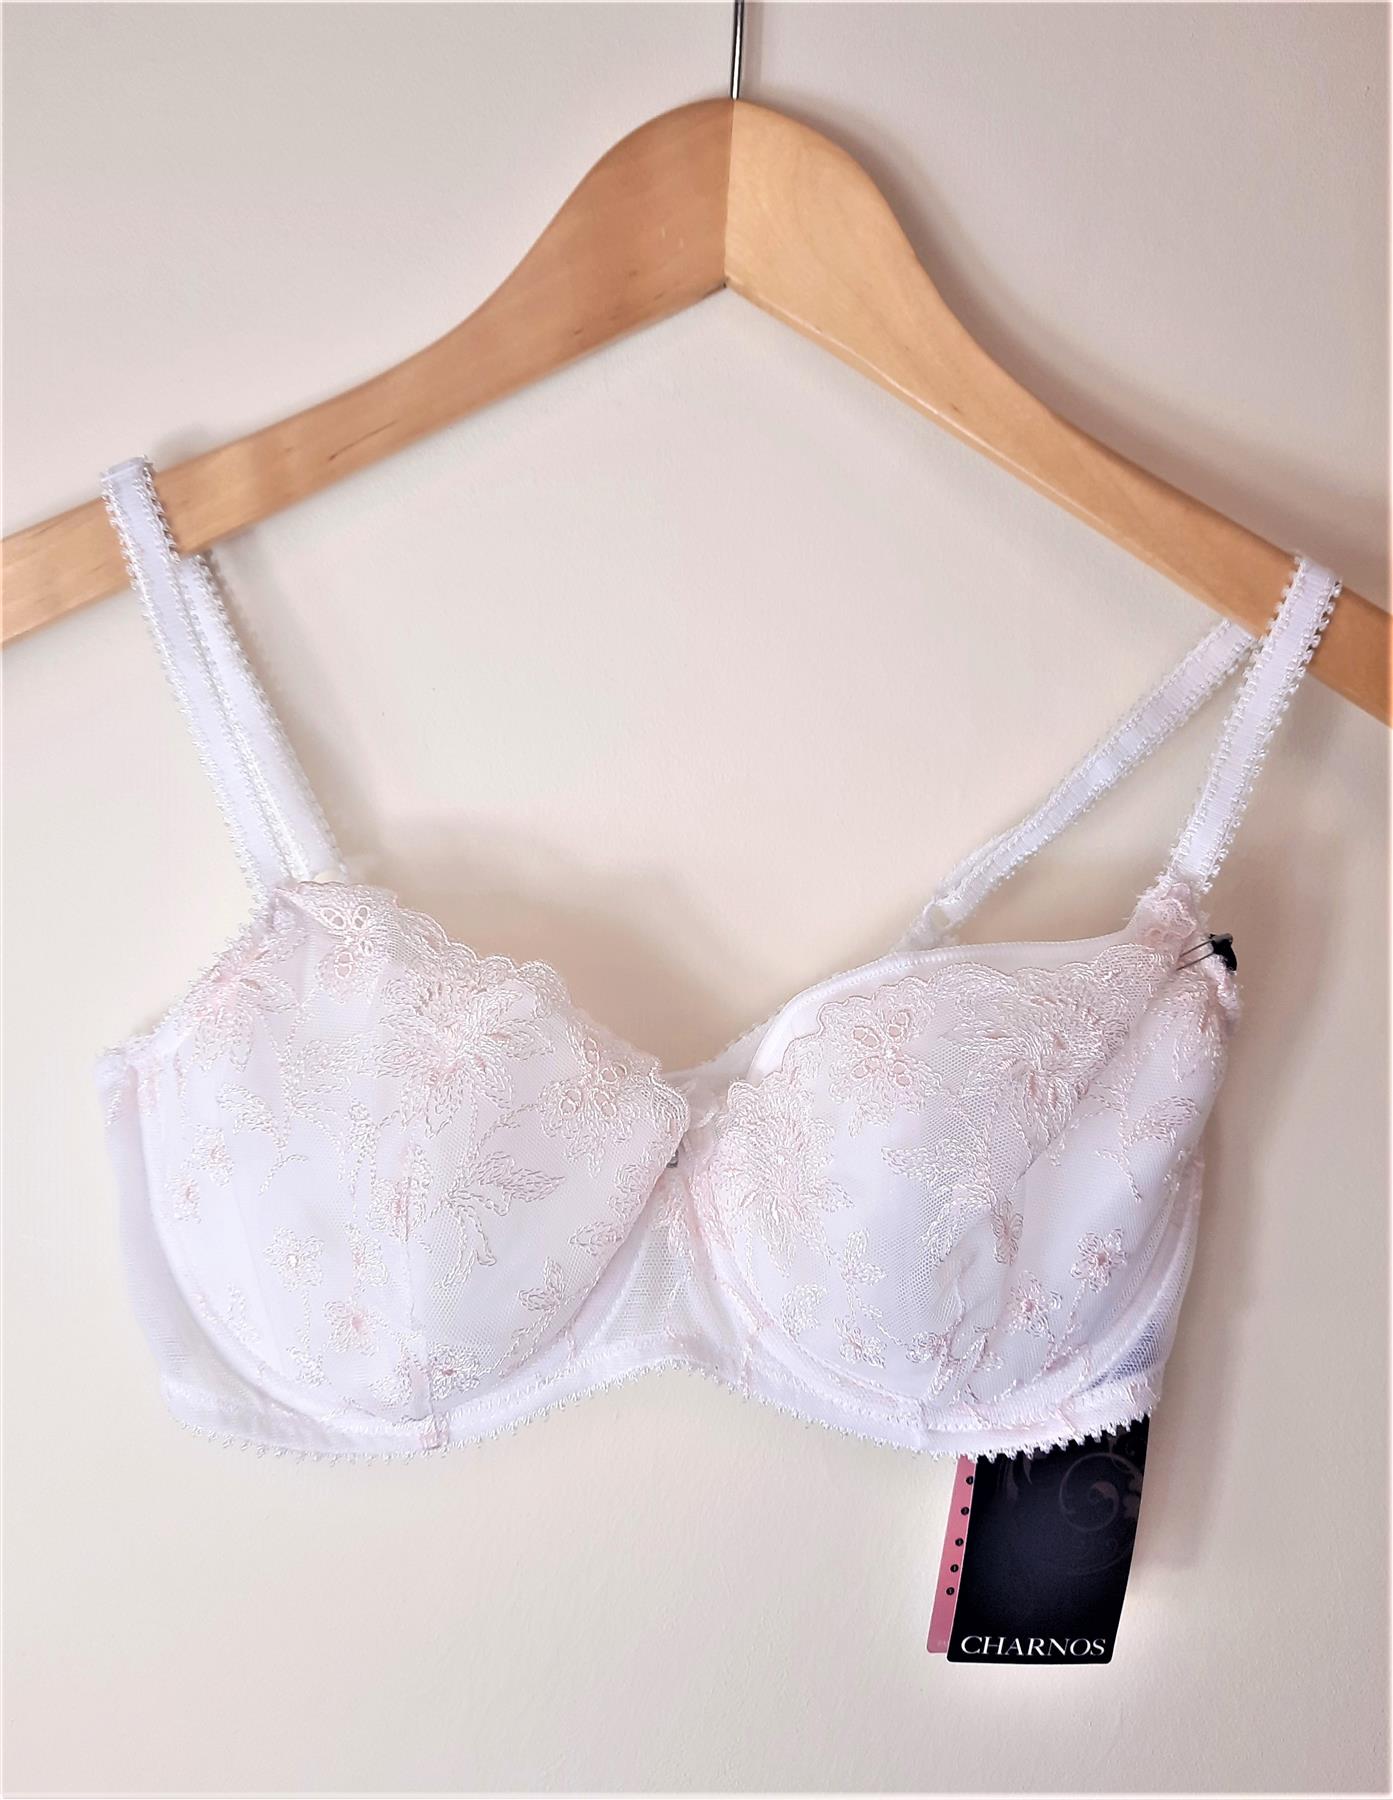 32C Bra Full Cup Charnos Grace Underwired Lightly Padded Lace Overlay Brand New